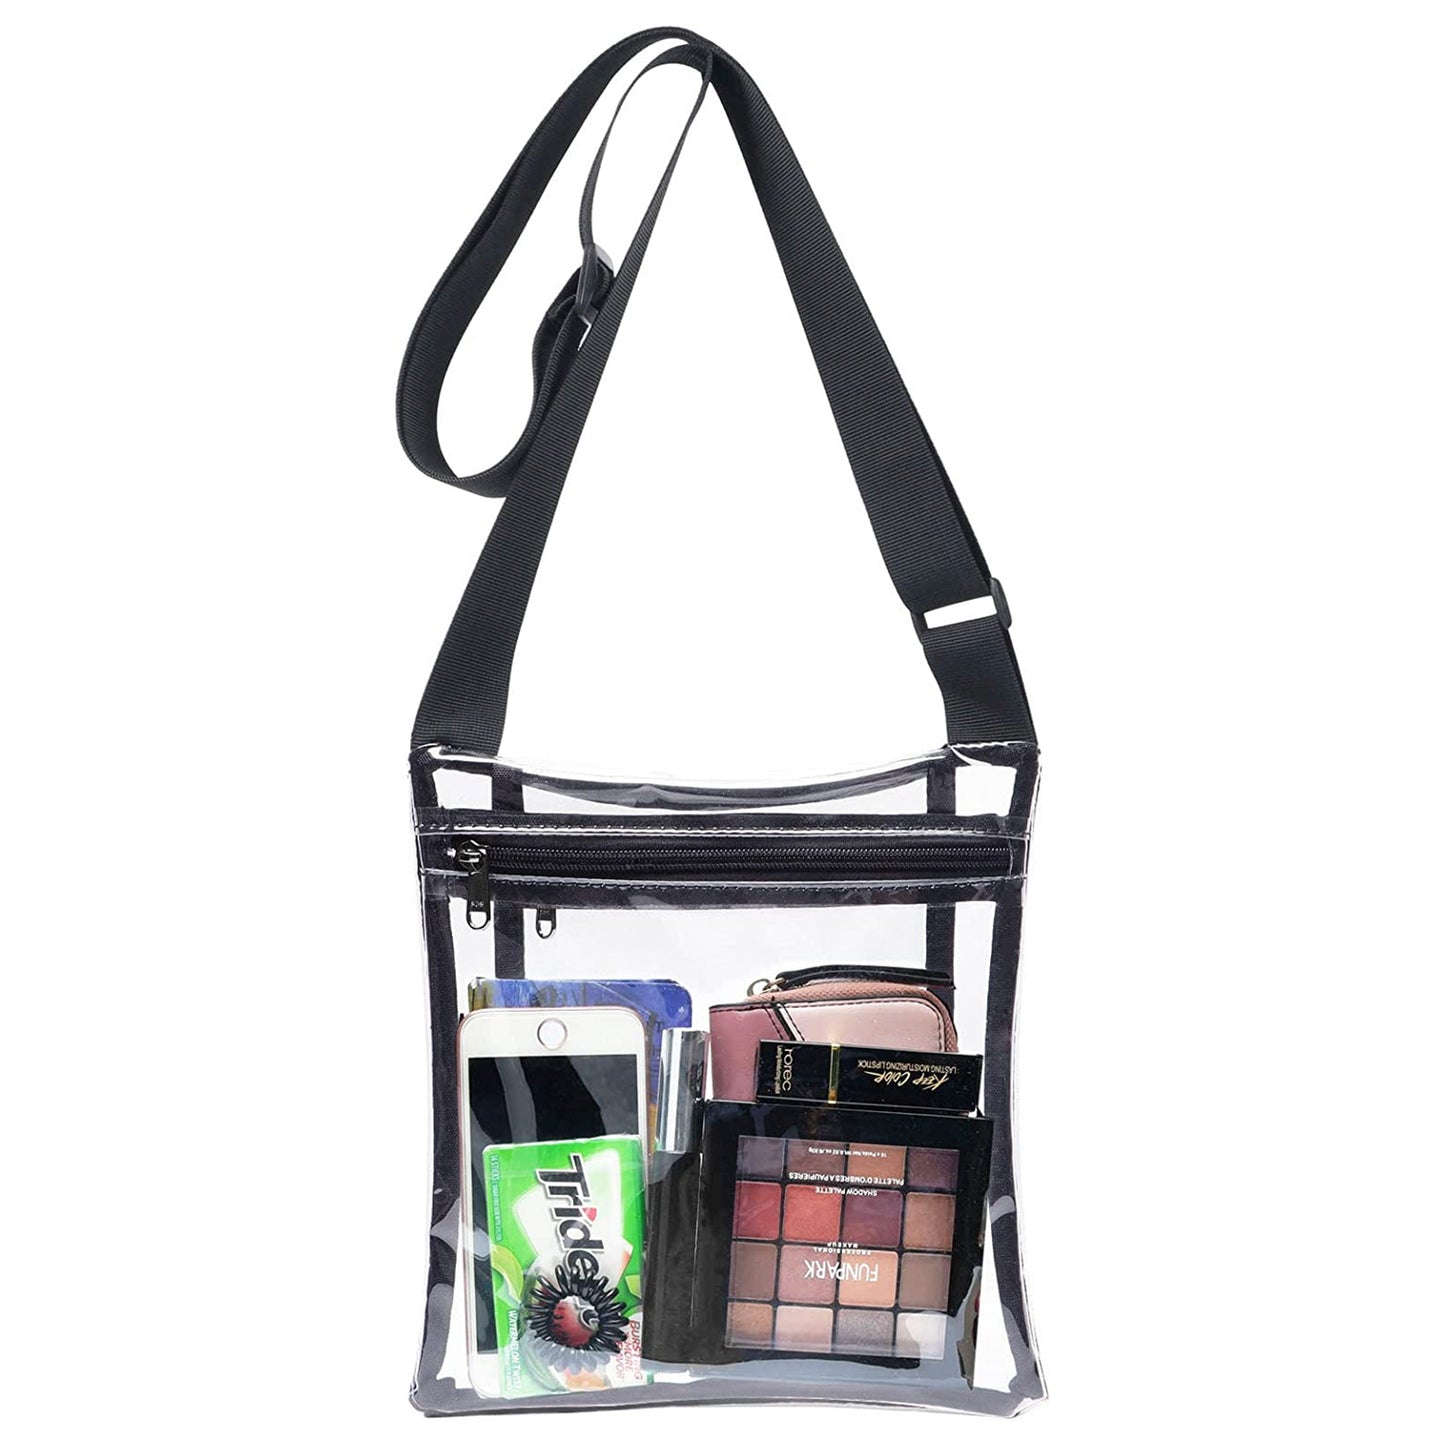 HULISEN Clear Crossbody Purse Bag, Stadium Approved, with Extra Inside Pocket 10"L x 9"W x 1"H